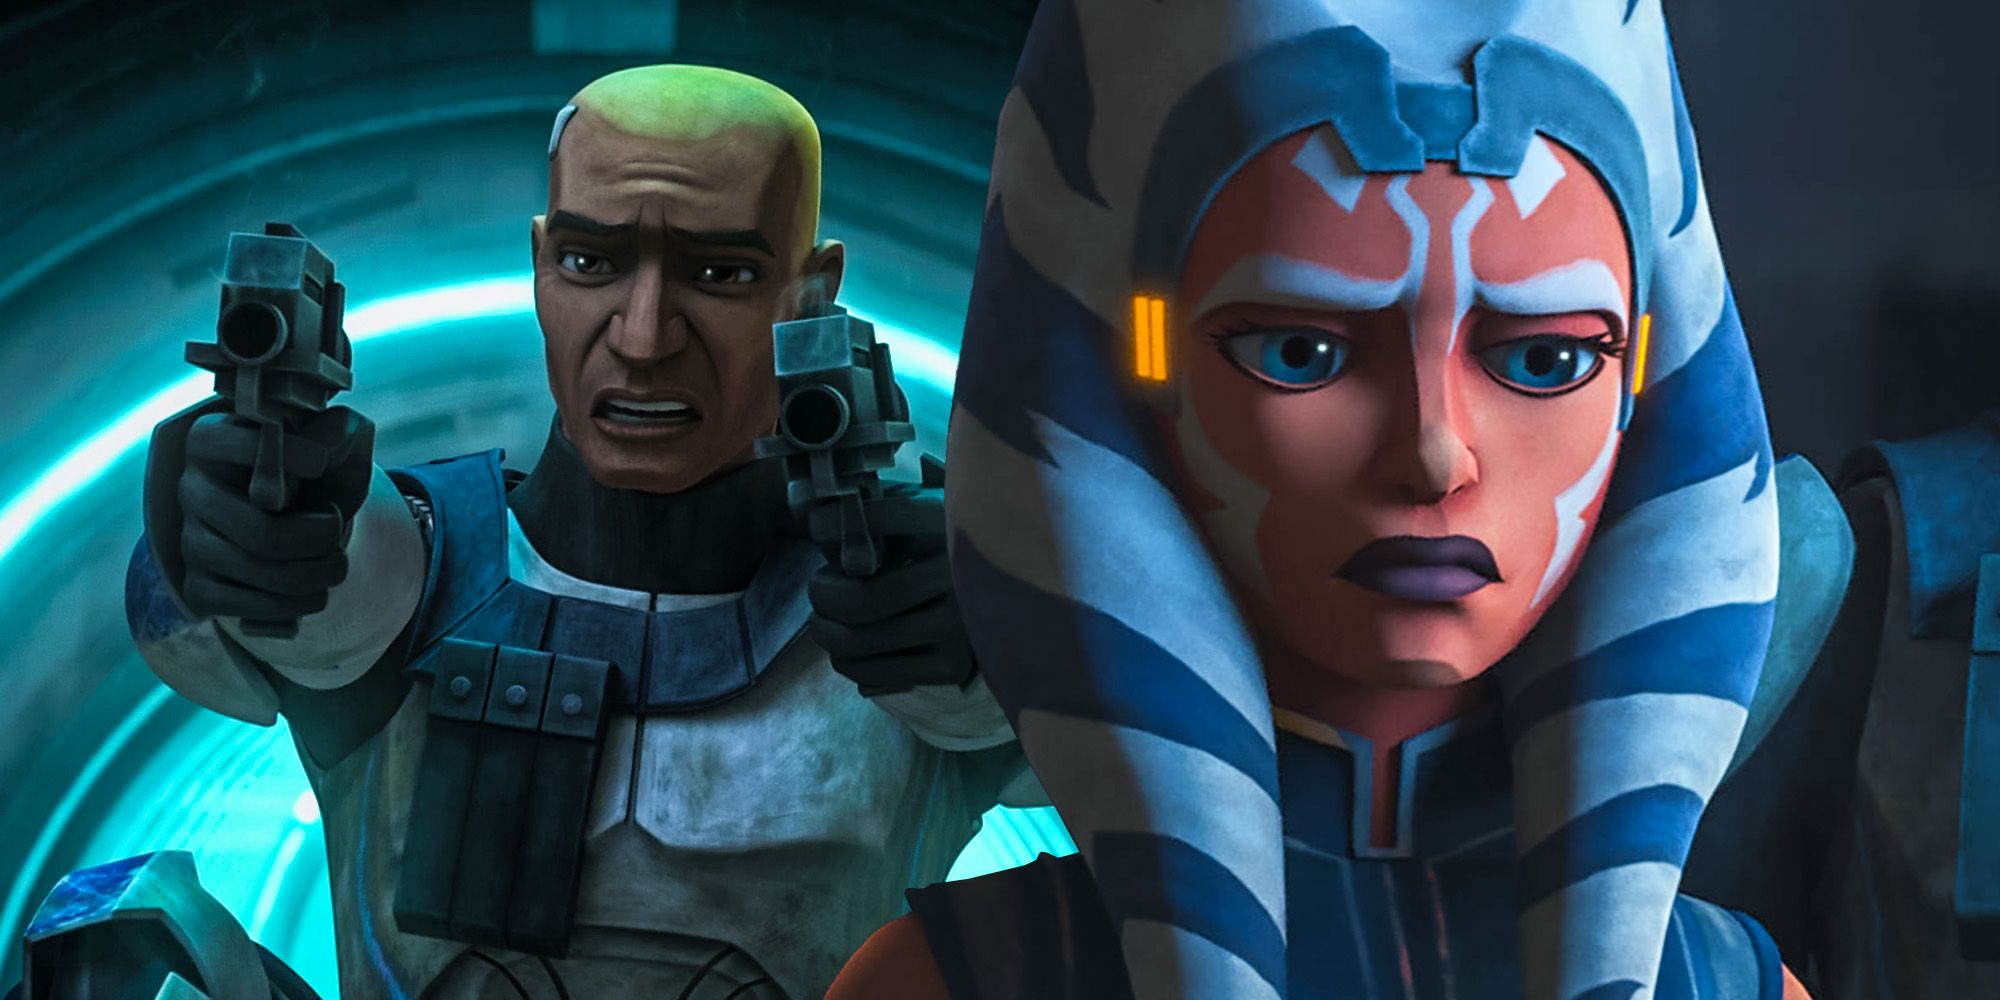 The Clone Wars Finale Retconned Rex's Order 66 Story (¿Pero fue mejor?)